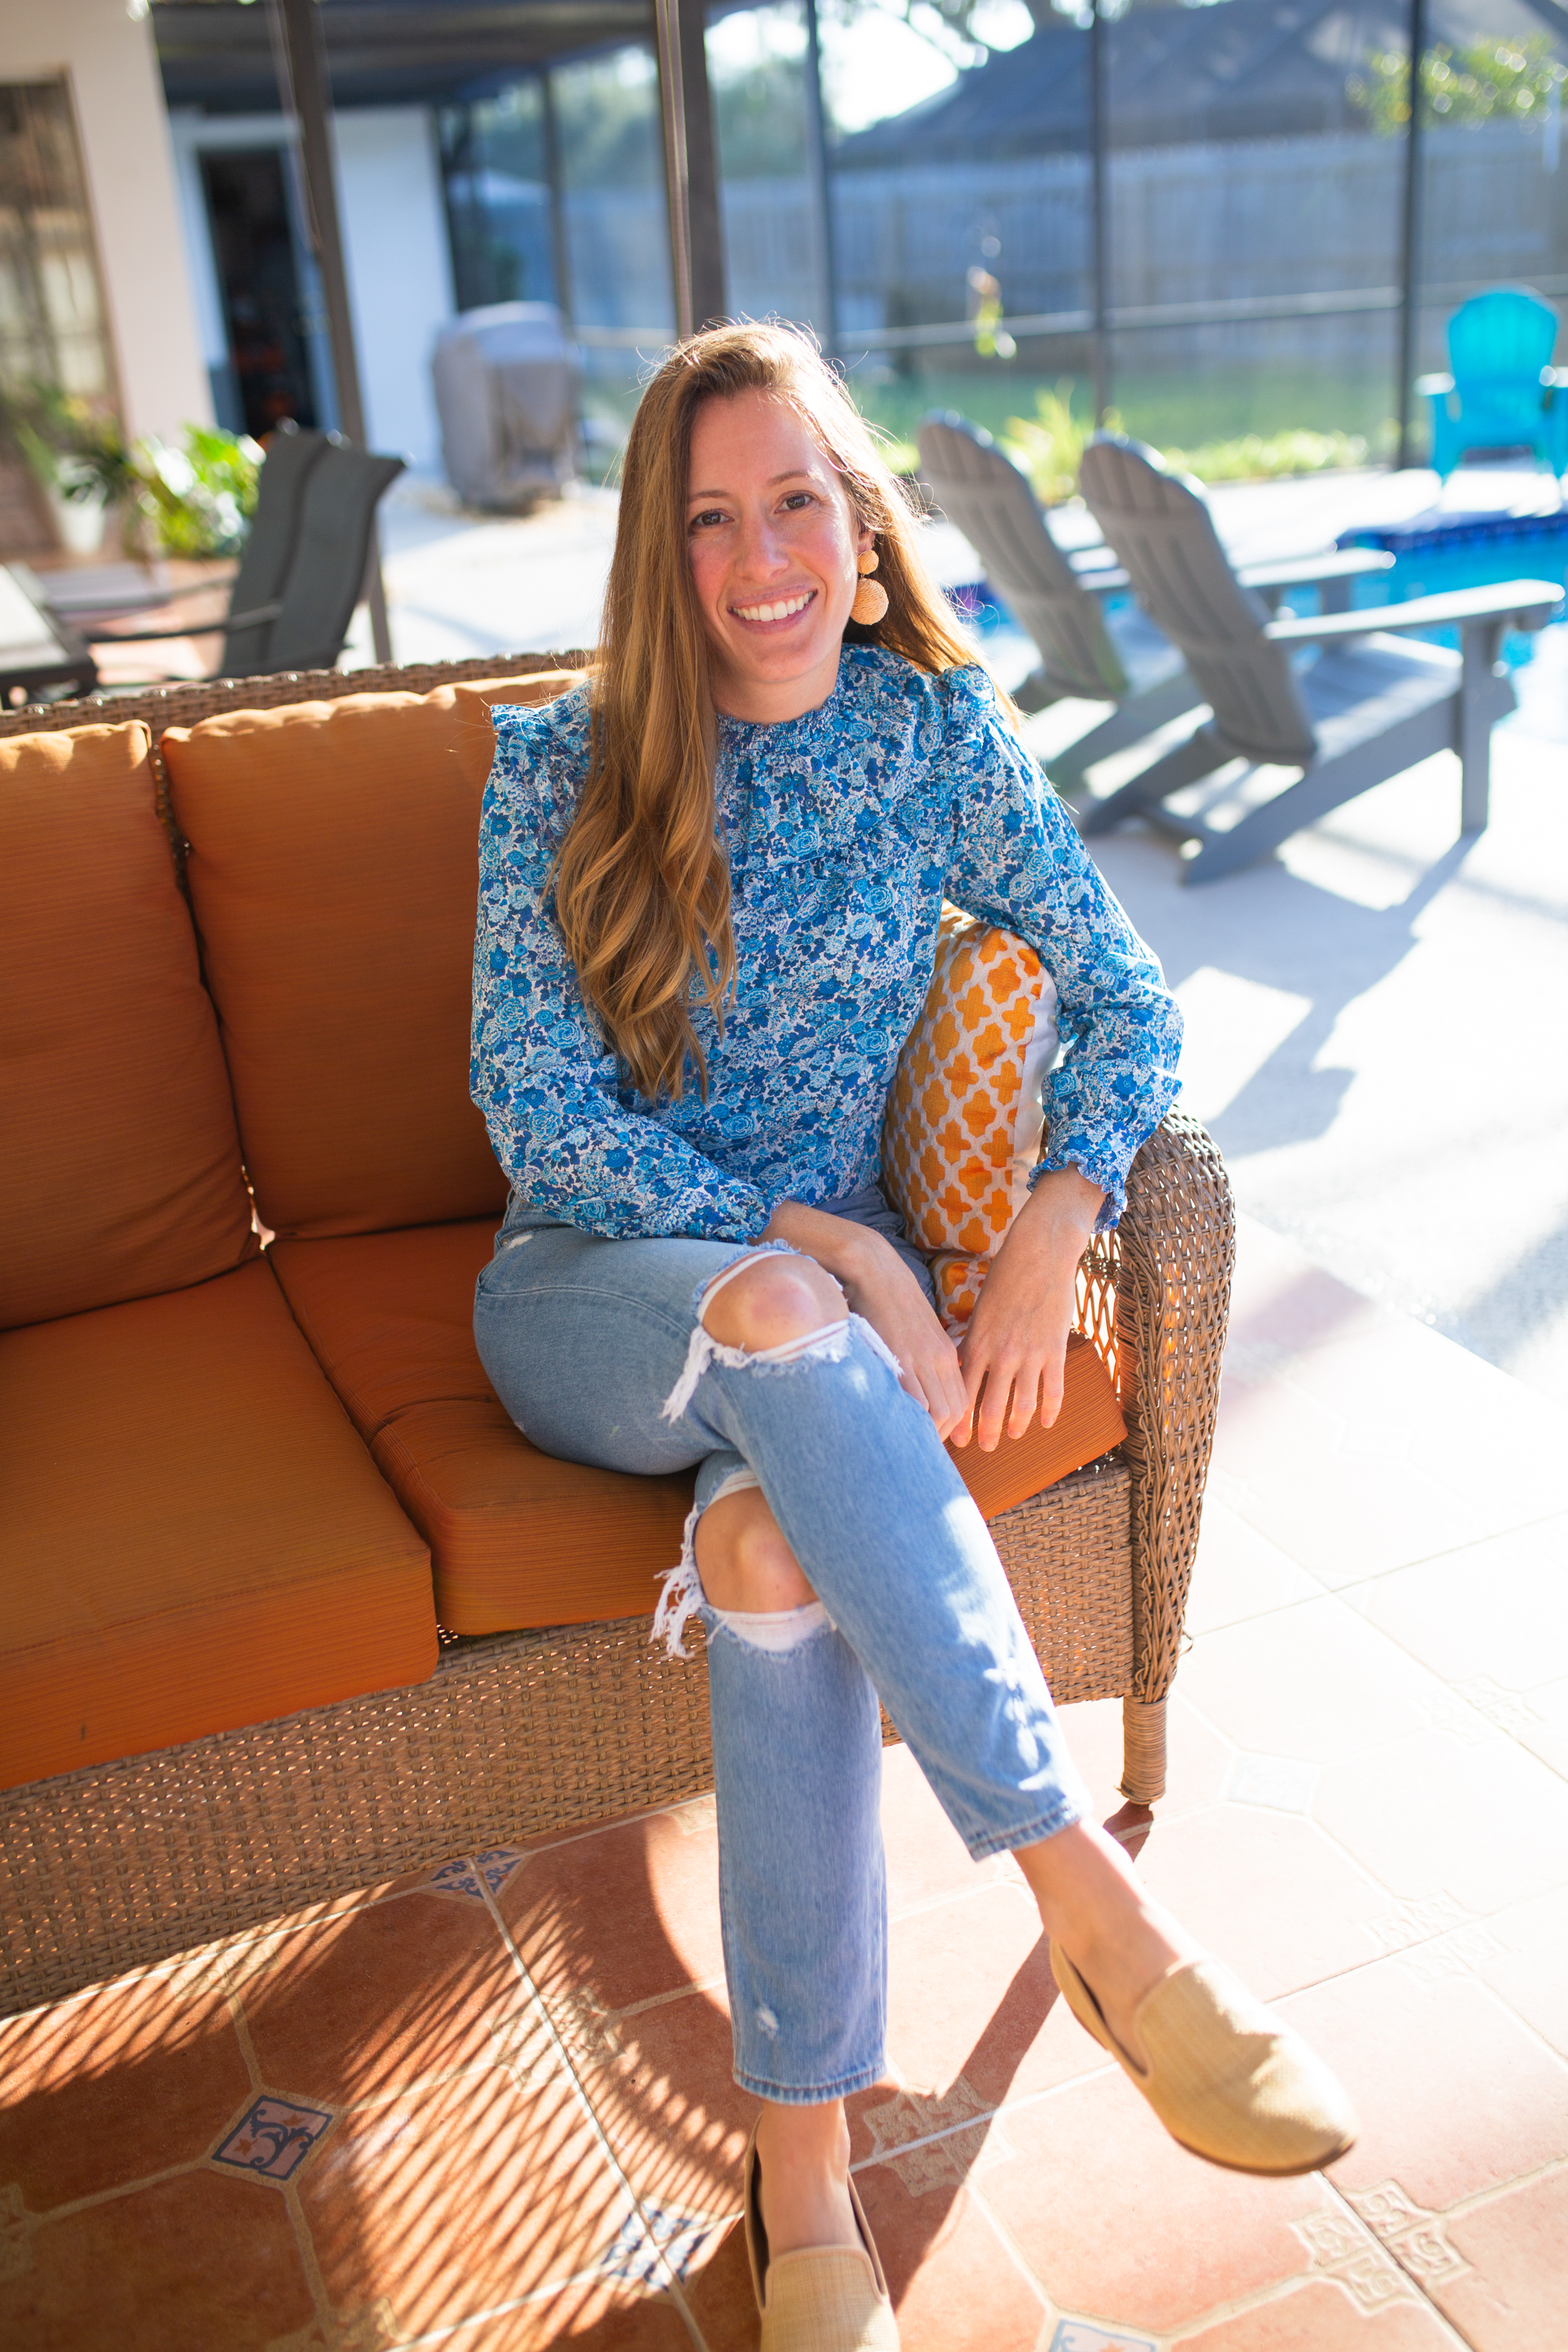 J.Crew Liberty Print Floral Blouse / Mom Jeans / Florida Blogger / Ruffle Long Sleeve Top / Liberty London / Winter Outfit / Winter Style / Floral Top / Raffia Statement Earrings - Sunshine Style, A Florida Based Fashion and Lifestyle Blog by Katie